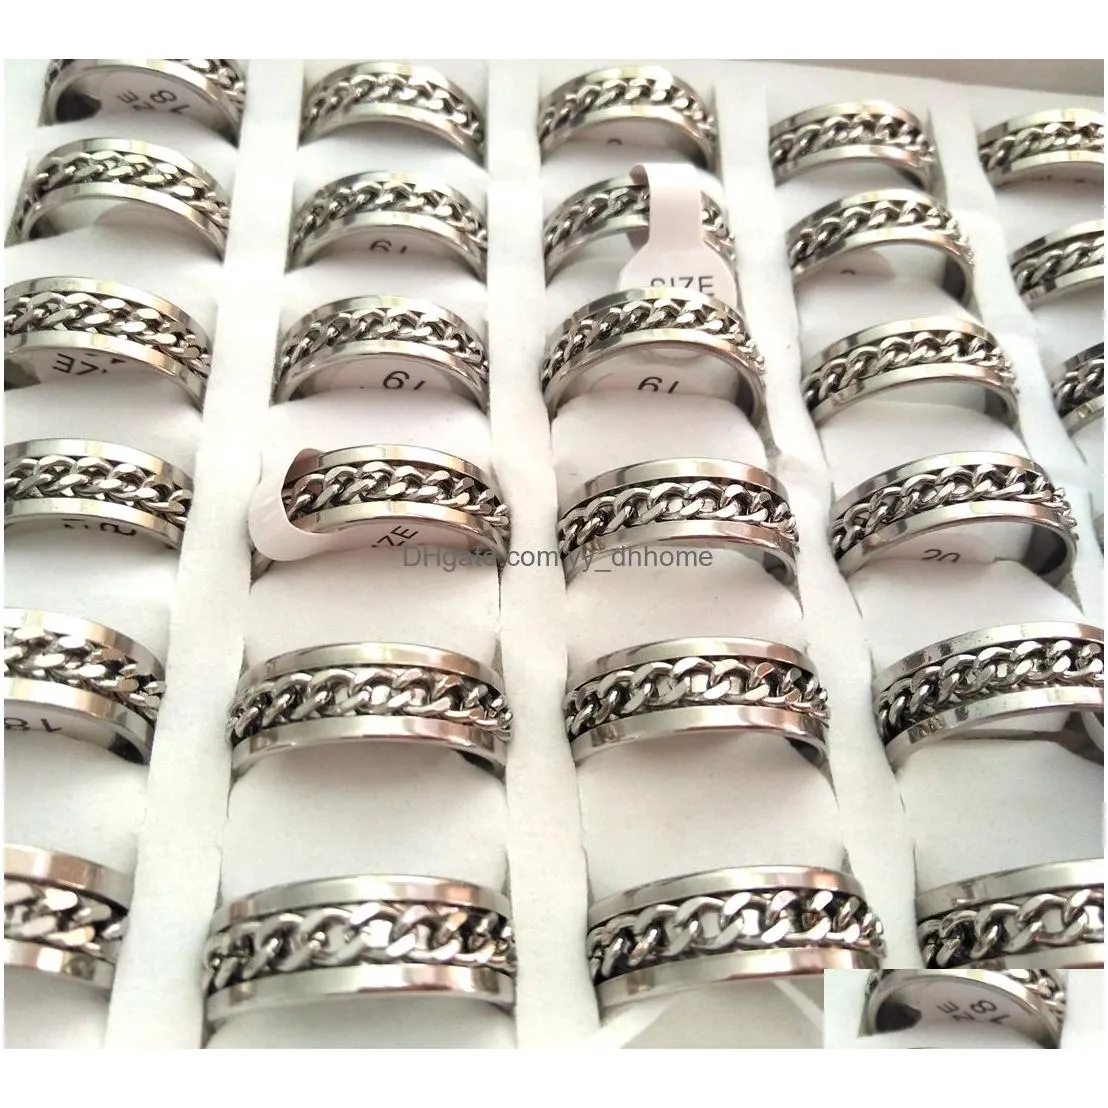 50pcs spin chain ring mens boys cool rock punk 316l stainless steel spinner ring man accessories birthday gift xmas gift 4 211x